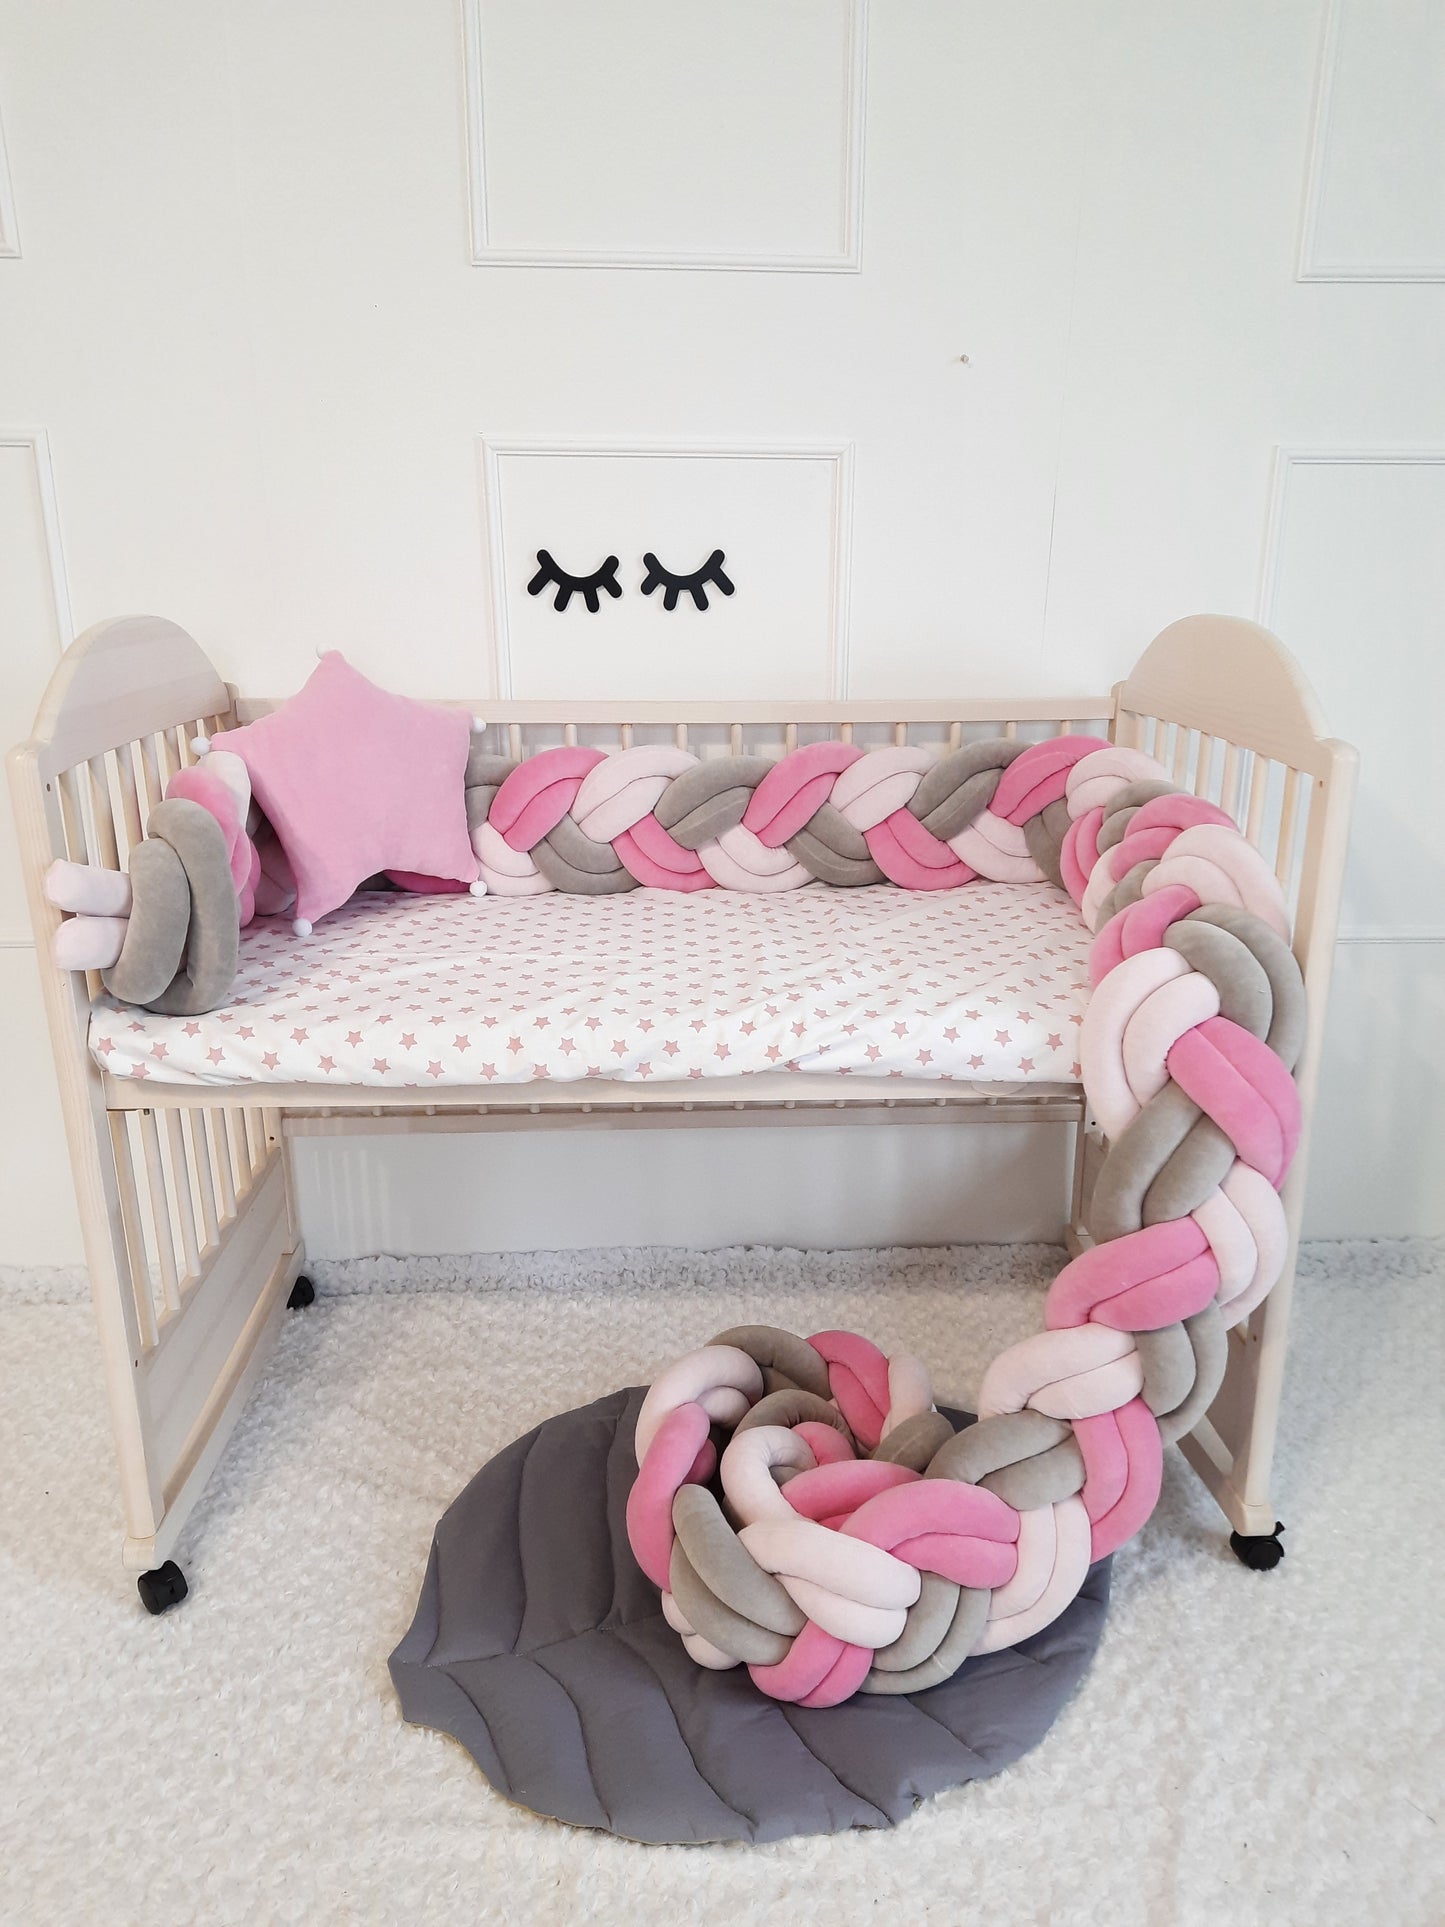 Long double braided cot bumper in 3 diffrent colors on the crib. Star pillow is a gift with the purchase of a braided crib bumper